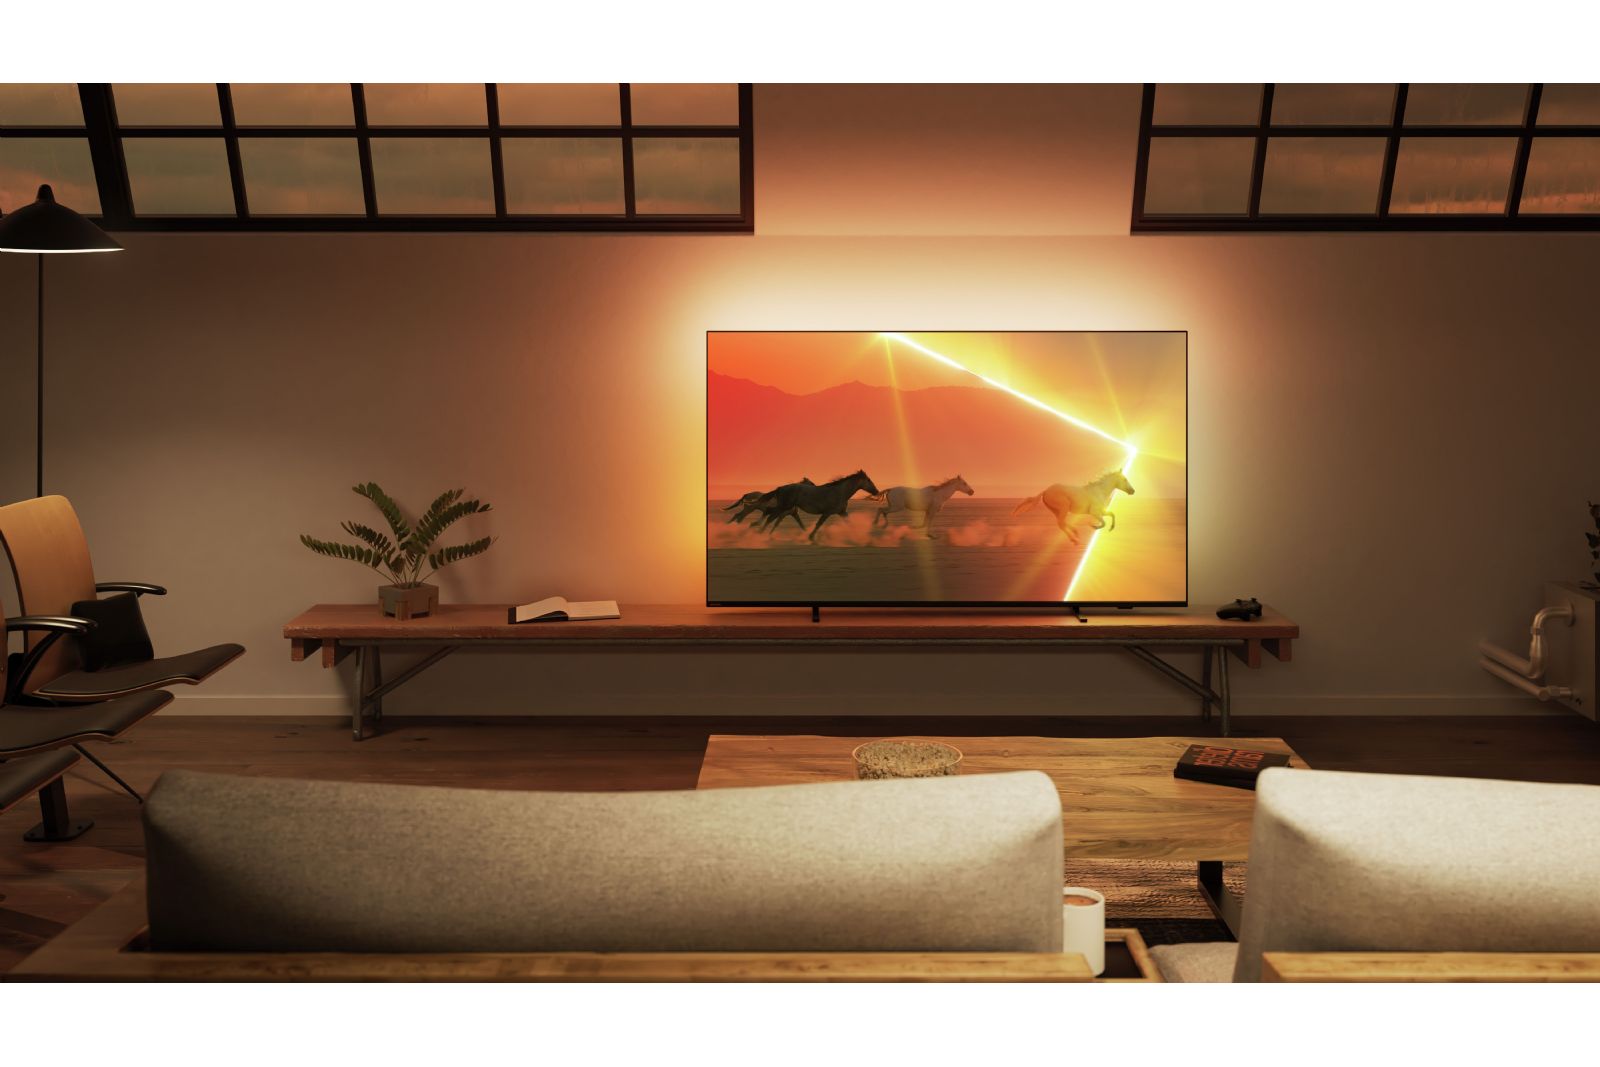 TV-apparater Philips 65PML9008/12 The Xtra 4K Ambilight-TV